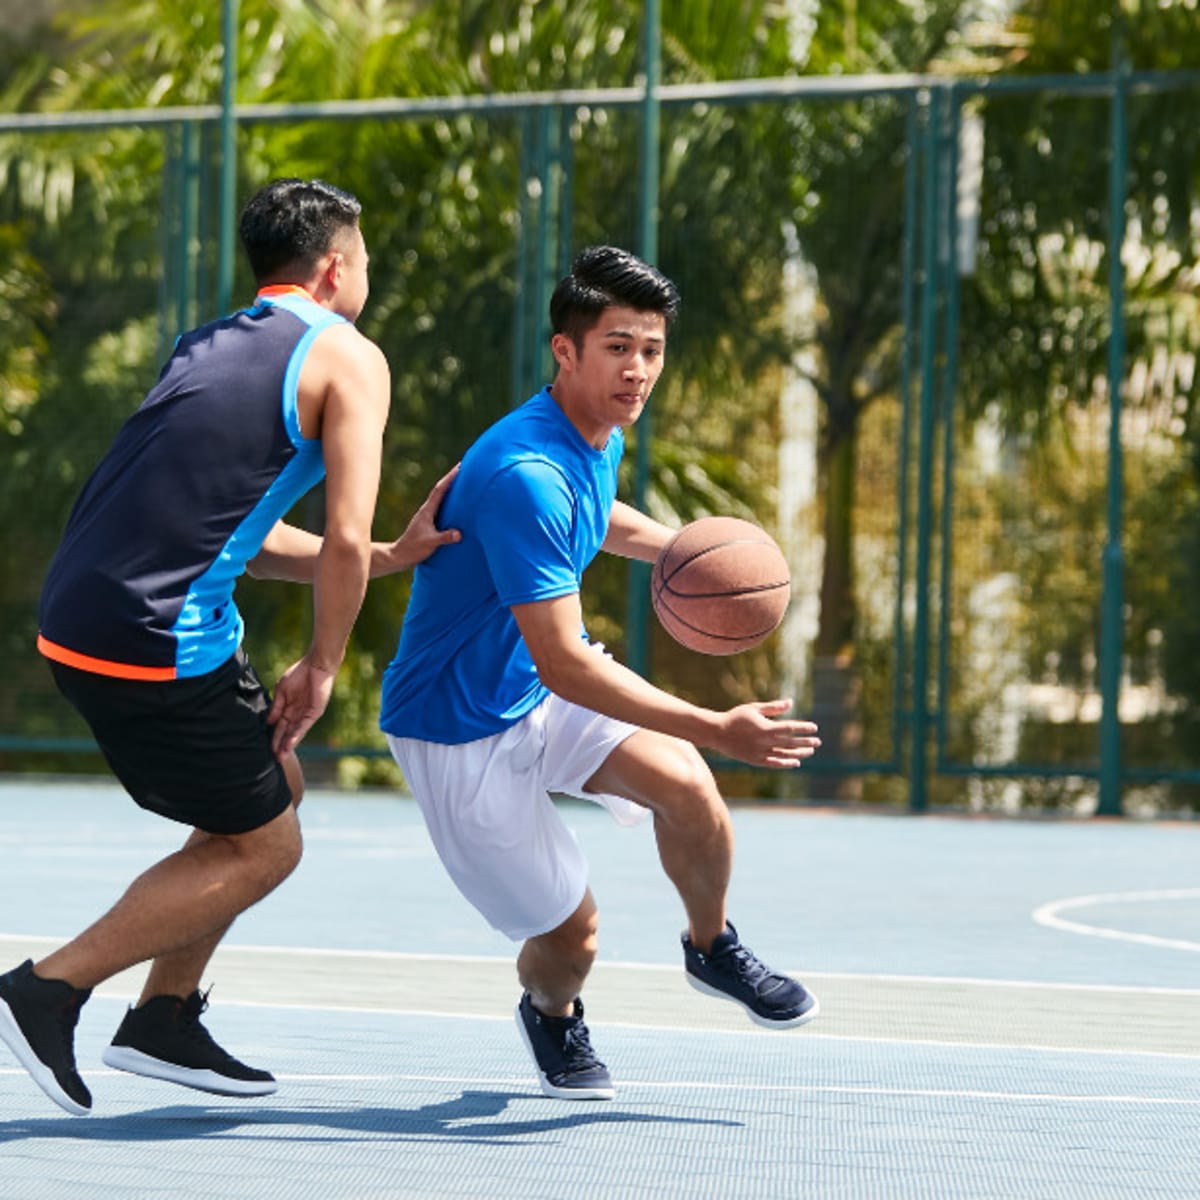 What To Wear For Basketball Practice? 10 Best Tips